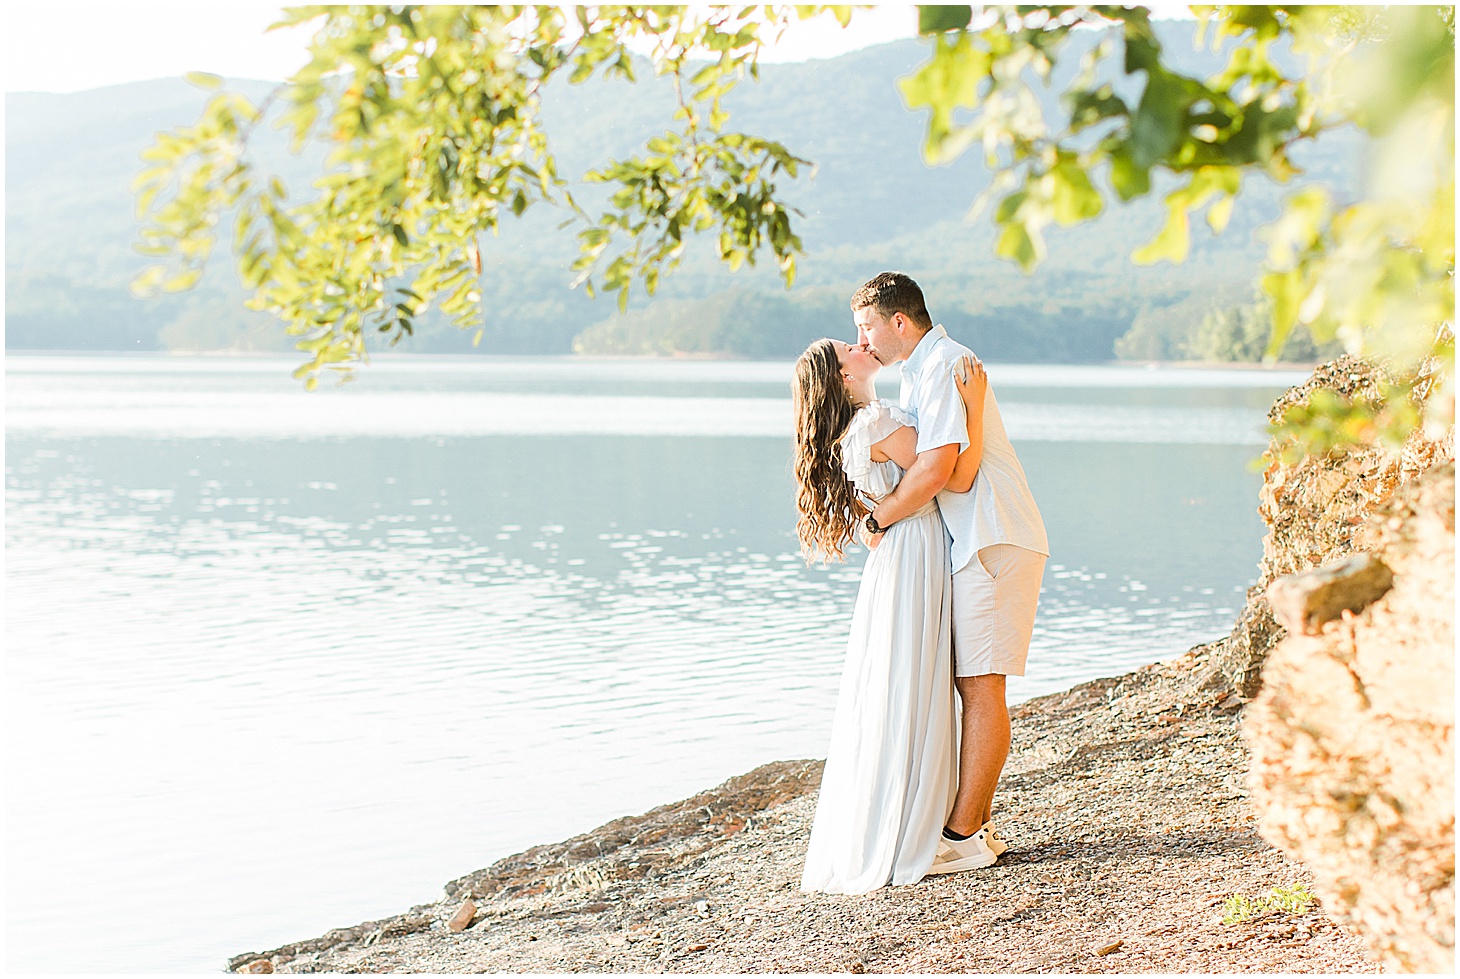 carvinscove_roanokeengagementsession_virginiaweddingphotographer_vaweddingphotographer_photo_0094.jpg